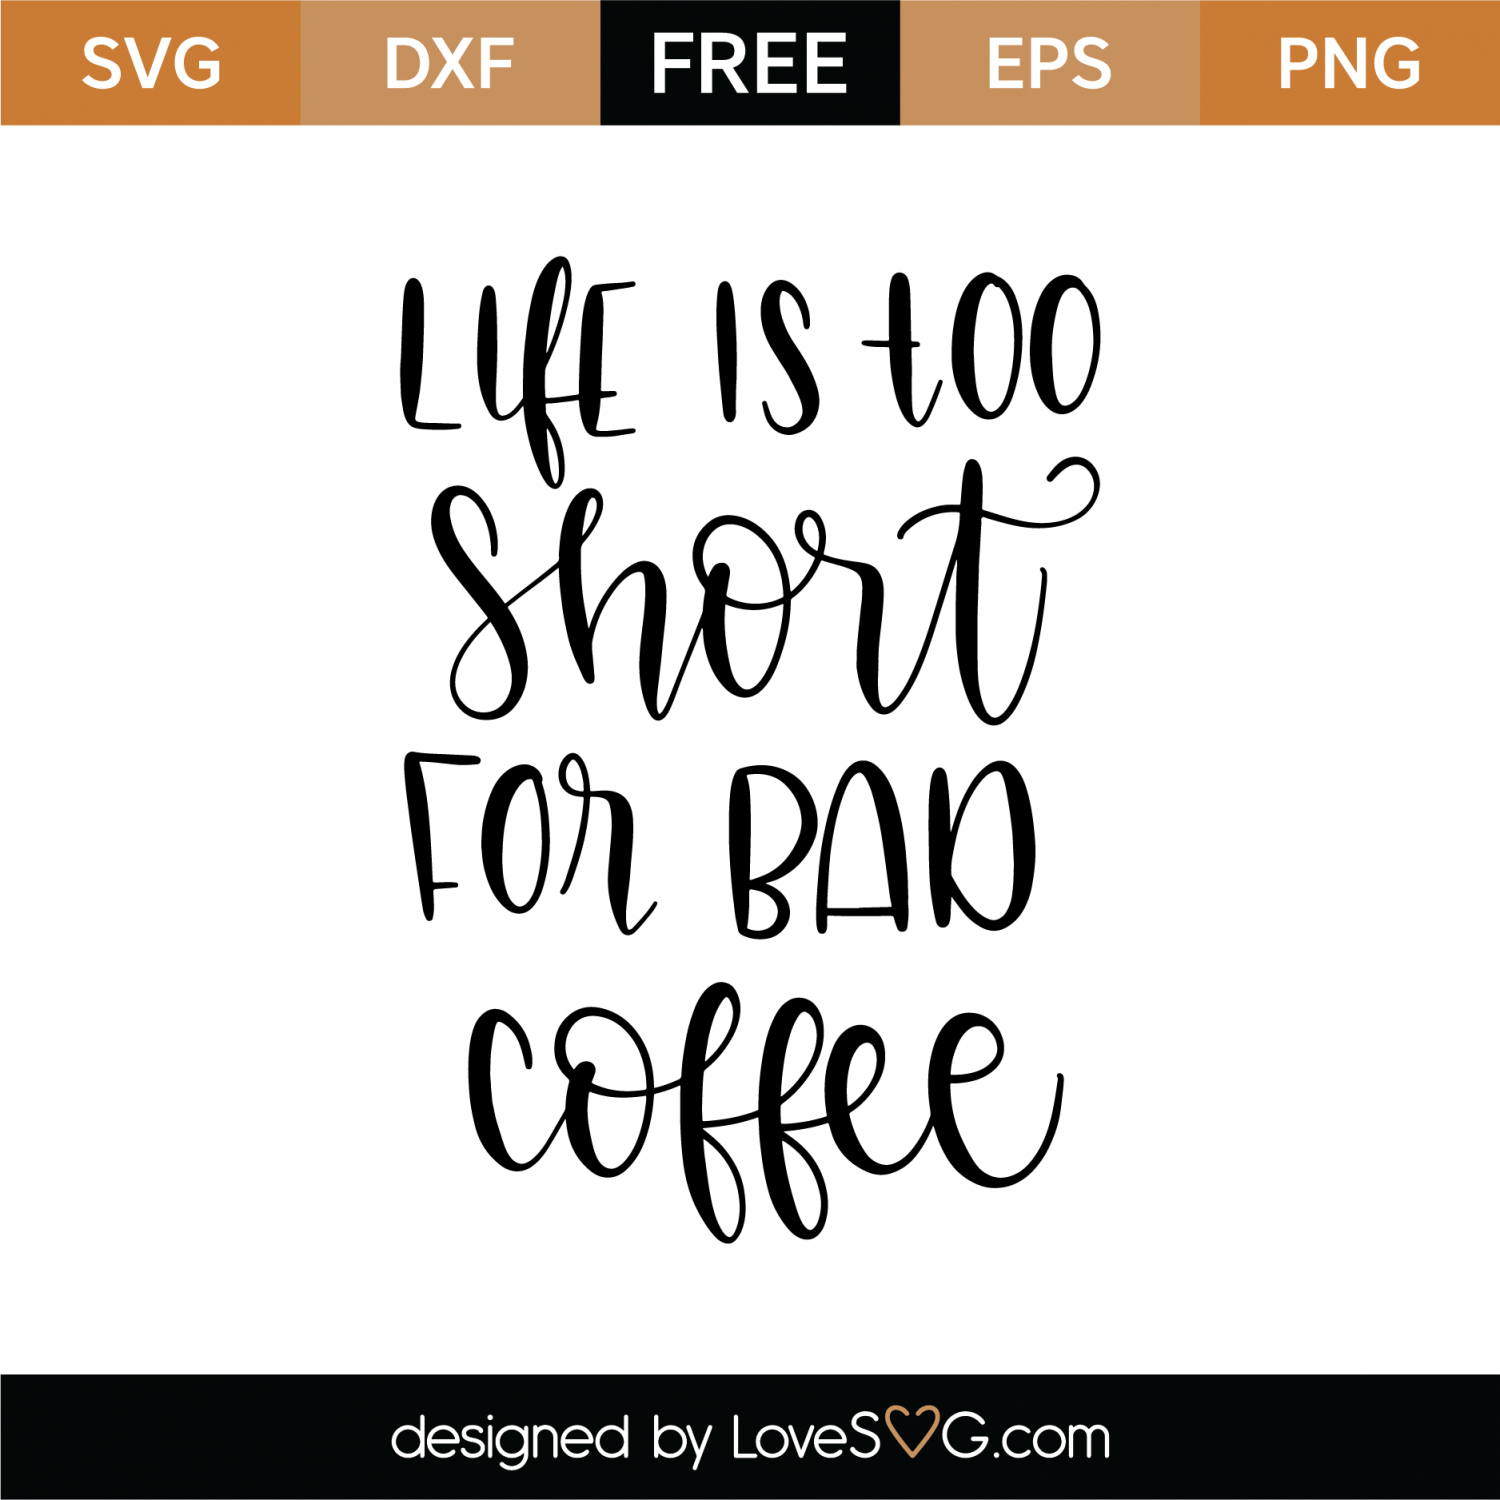 Download Free Life Is Too Short For Bad Coffee SVG Cut File | Lovesvg.com